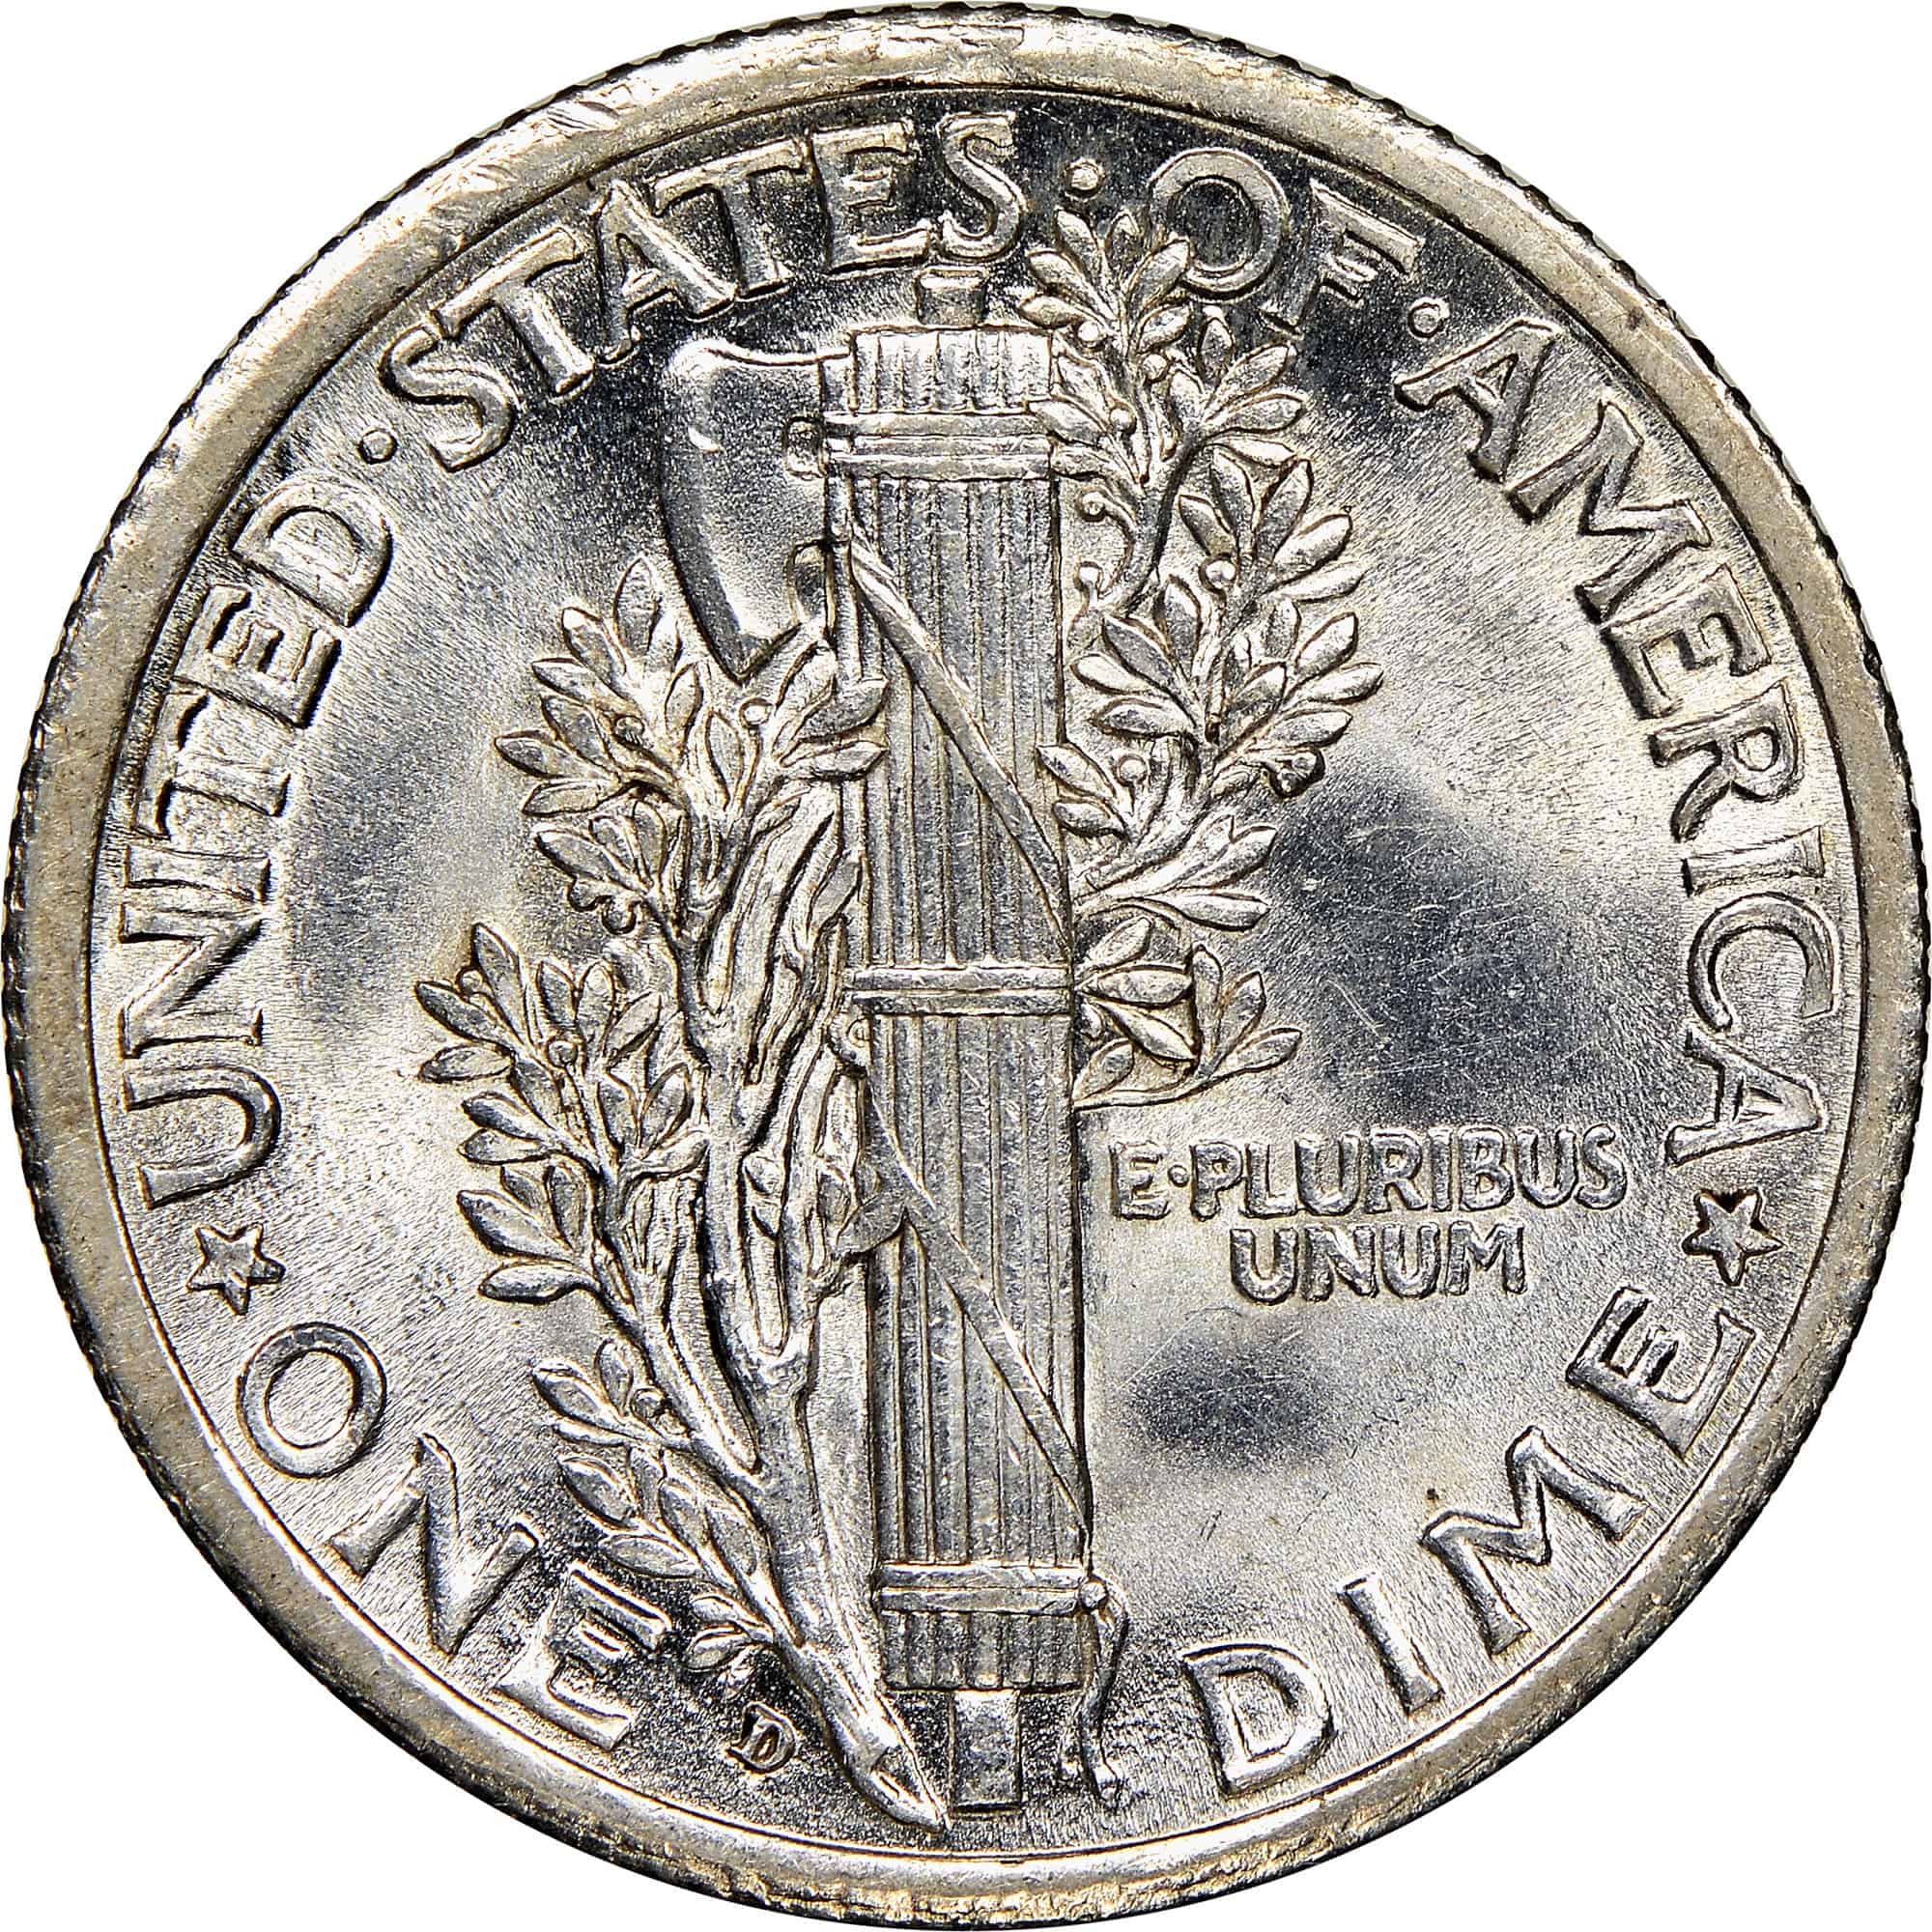 The reverse of the 1916 Mercury dime